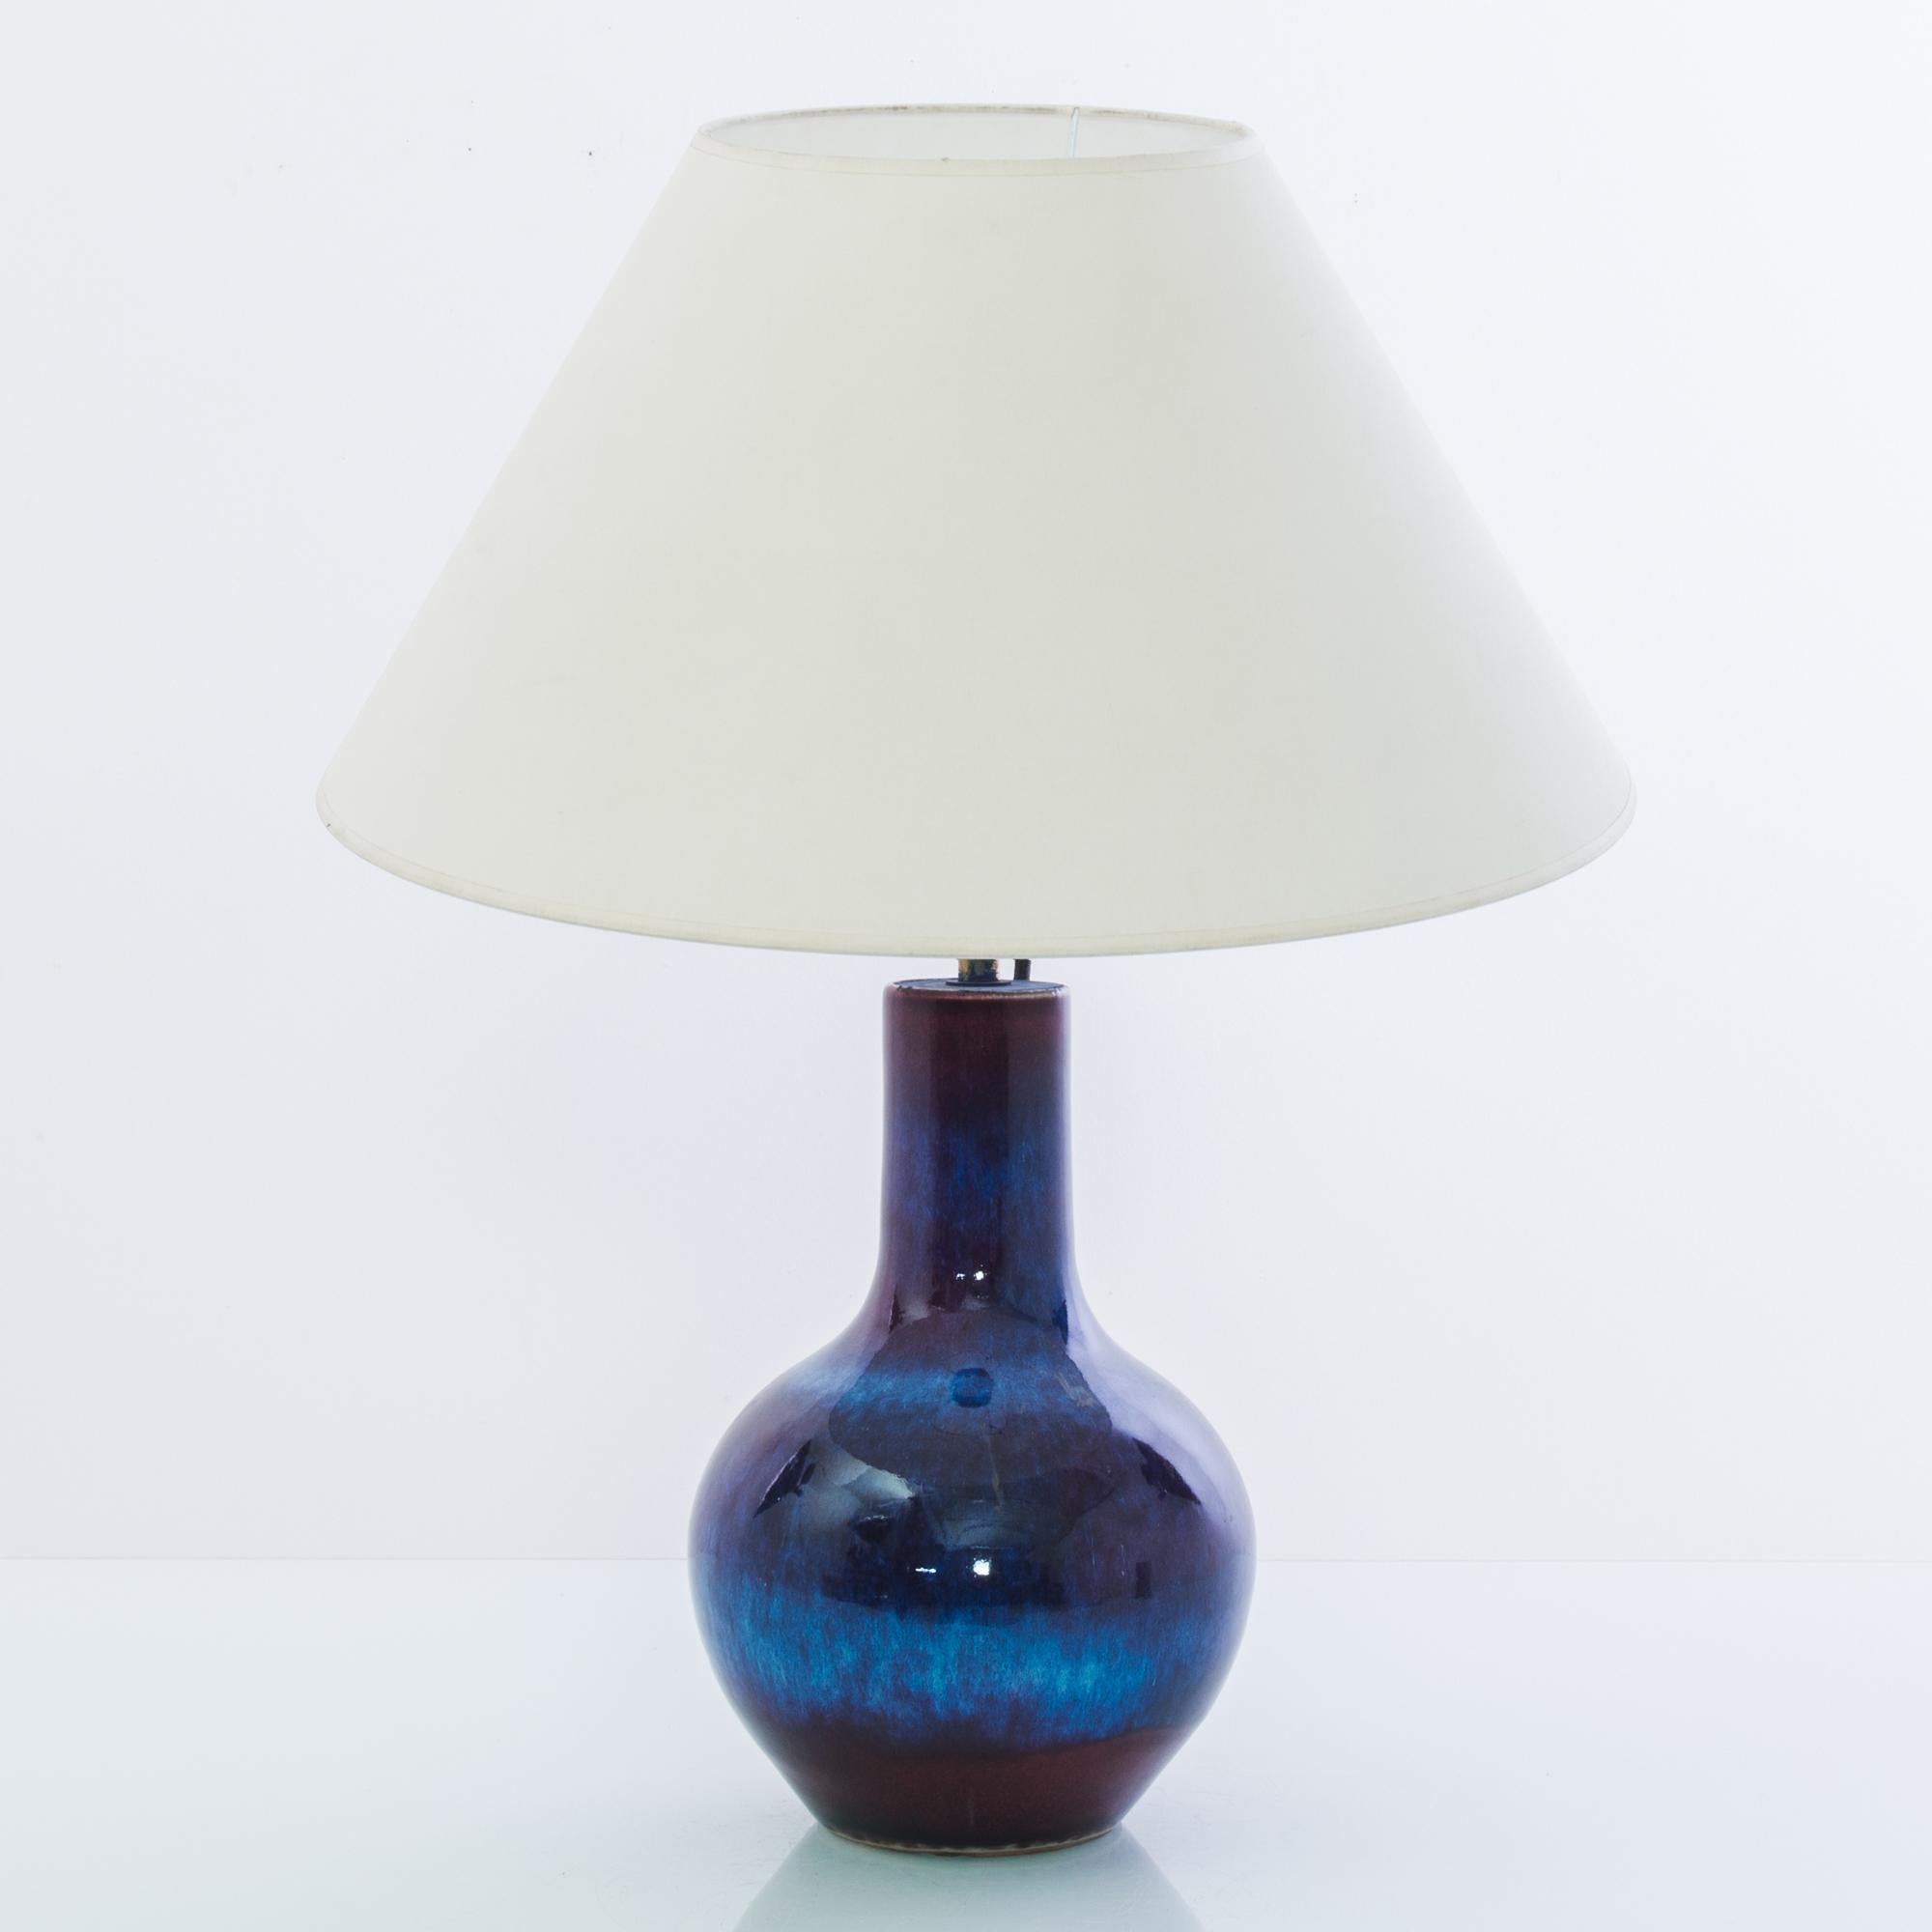 A vintage Chinese vase, fitted with an adjustable brass fixture and E26 lighting socket. The widely striped dark blue glaze creates a vivid visual impact. Textured glazes, attractive colors and organic shape grants a sensuous tactility to the form.